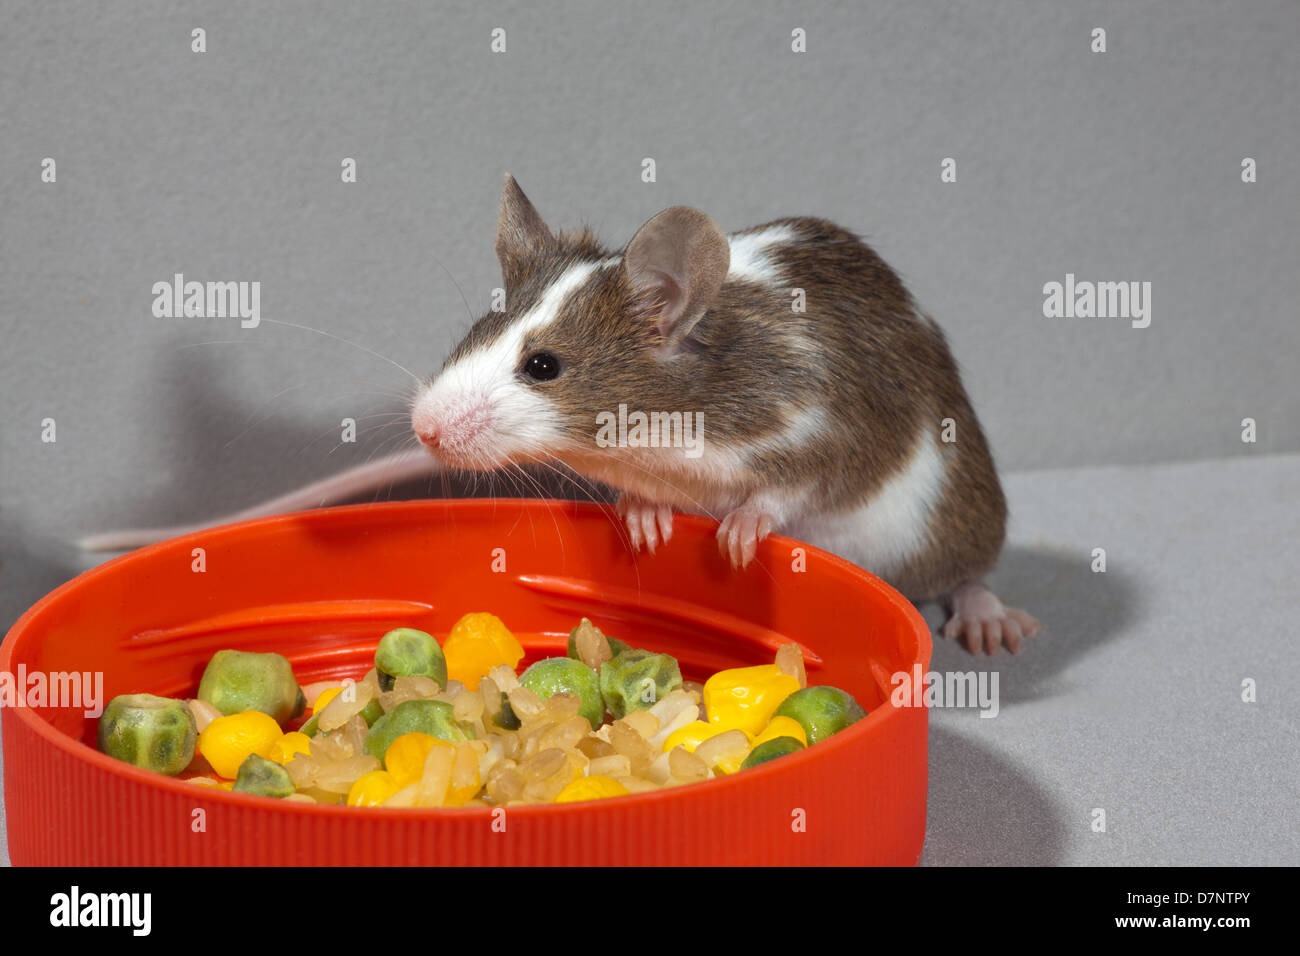 Pet Fancy Mouse (Mus musculus). Skewbald, brown and white. Sitting alongside a food container. Stock Photo